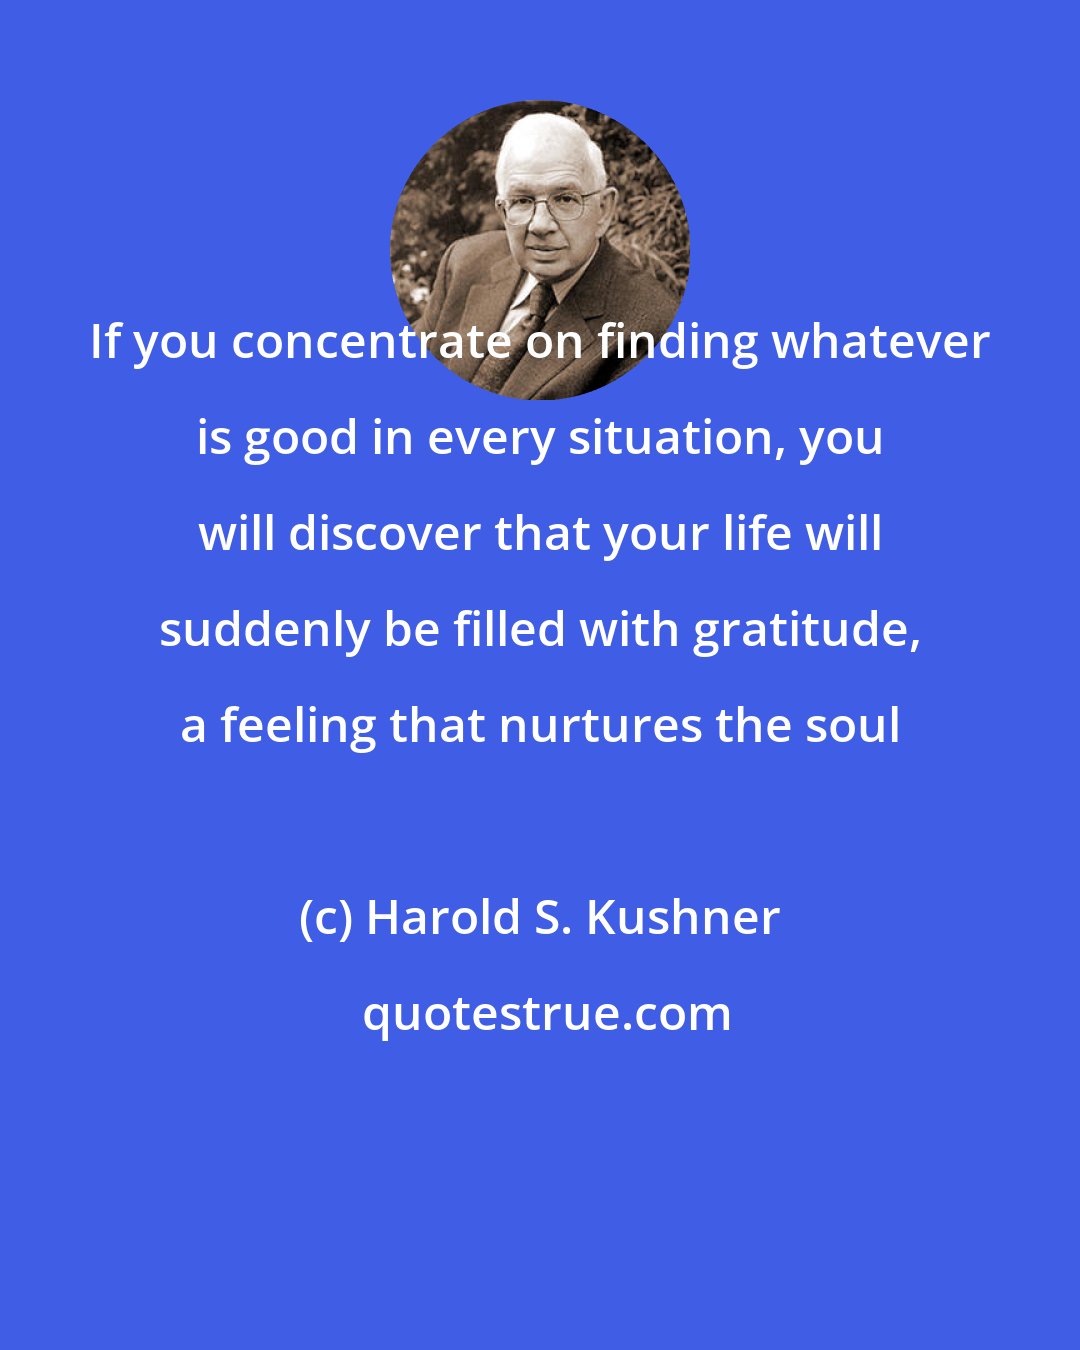 Harold S. Kushner: If you concentrate on finding whatever is good in every situation, you will discover that your life will suddenly be filled with gratitude, a feeling that nurtures the soul